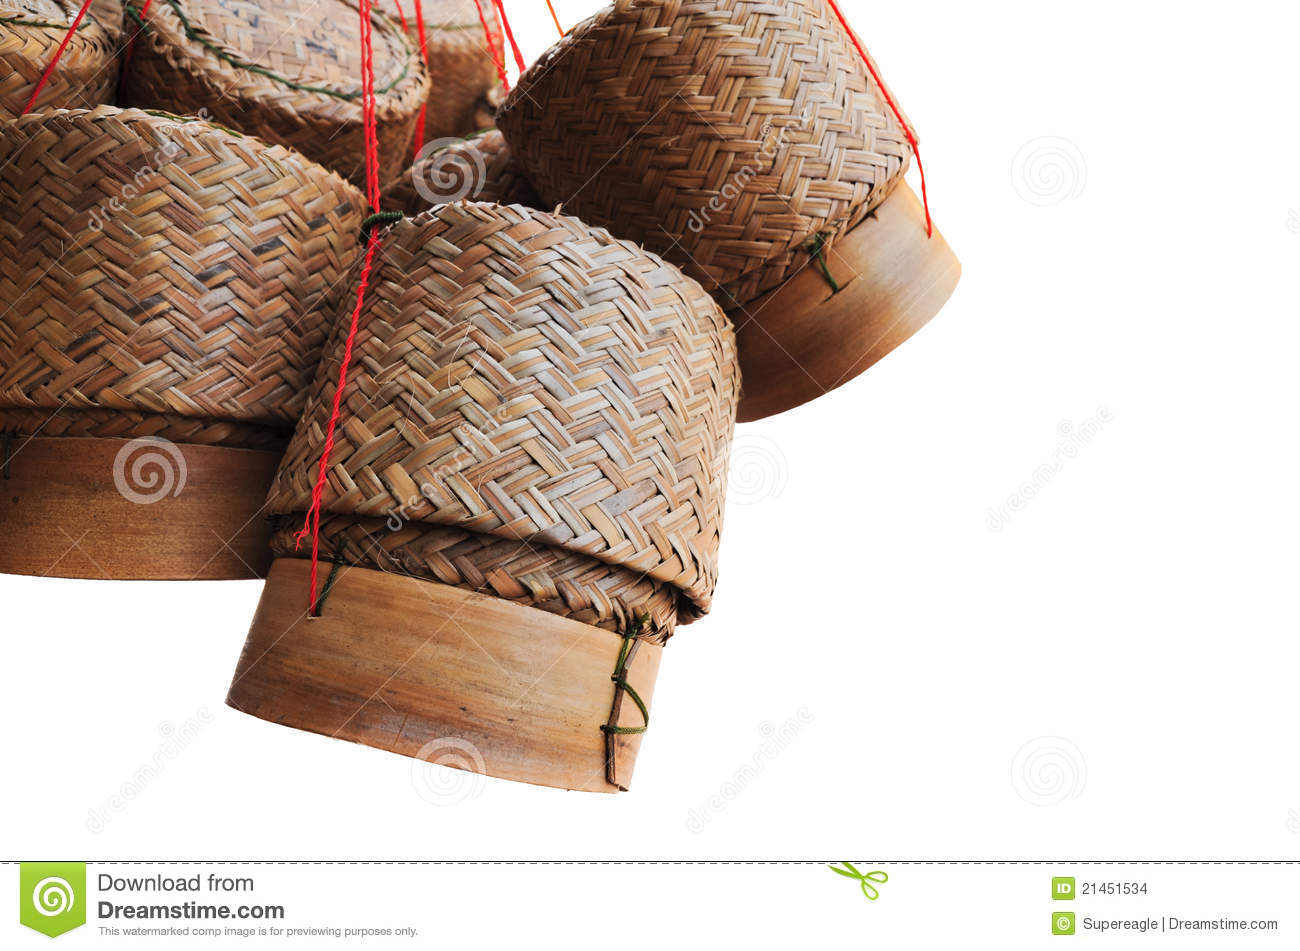 Wooden Rice Box In Thailand Stock Images   Image  21451534